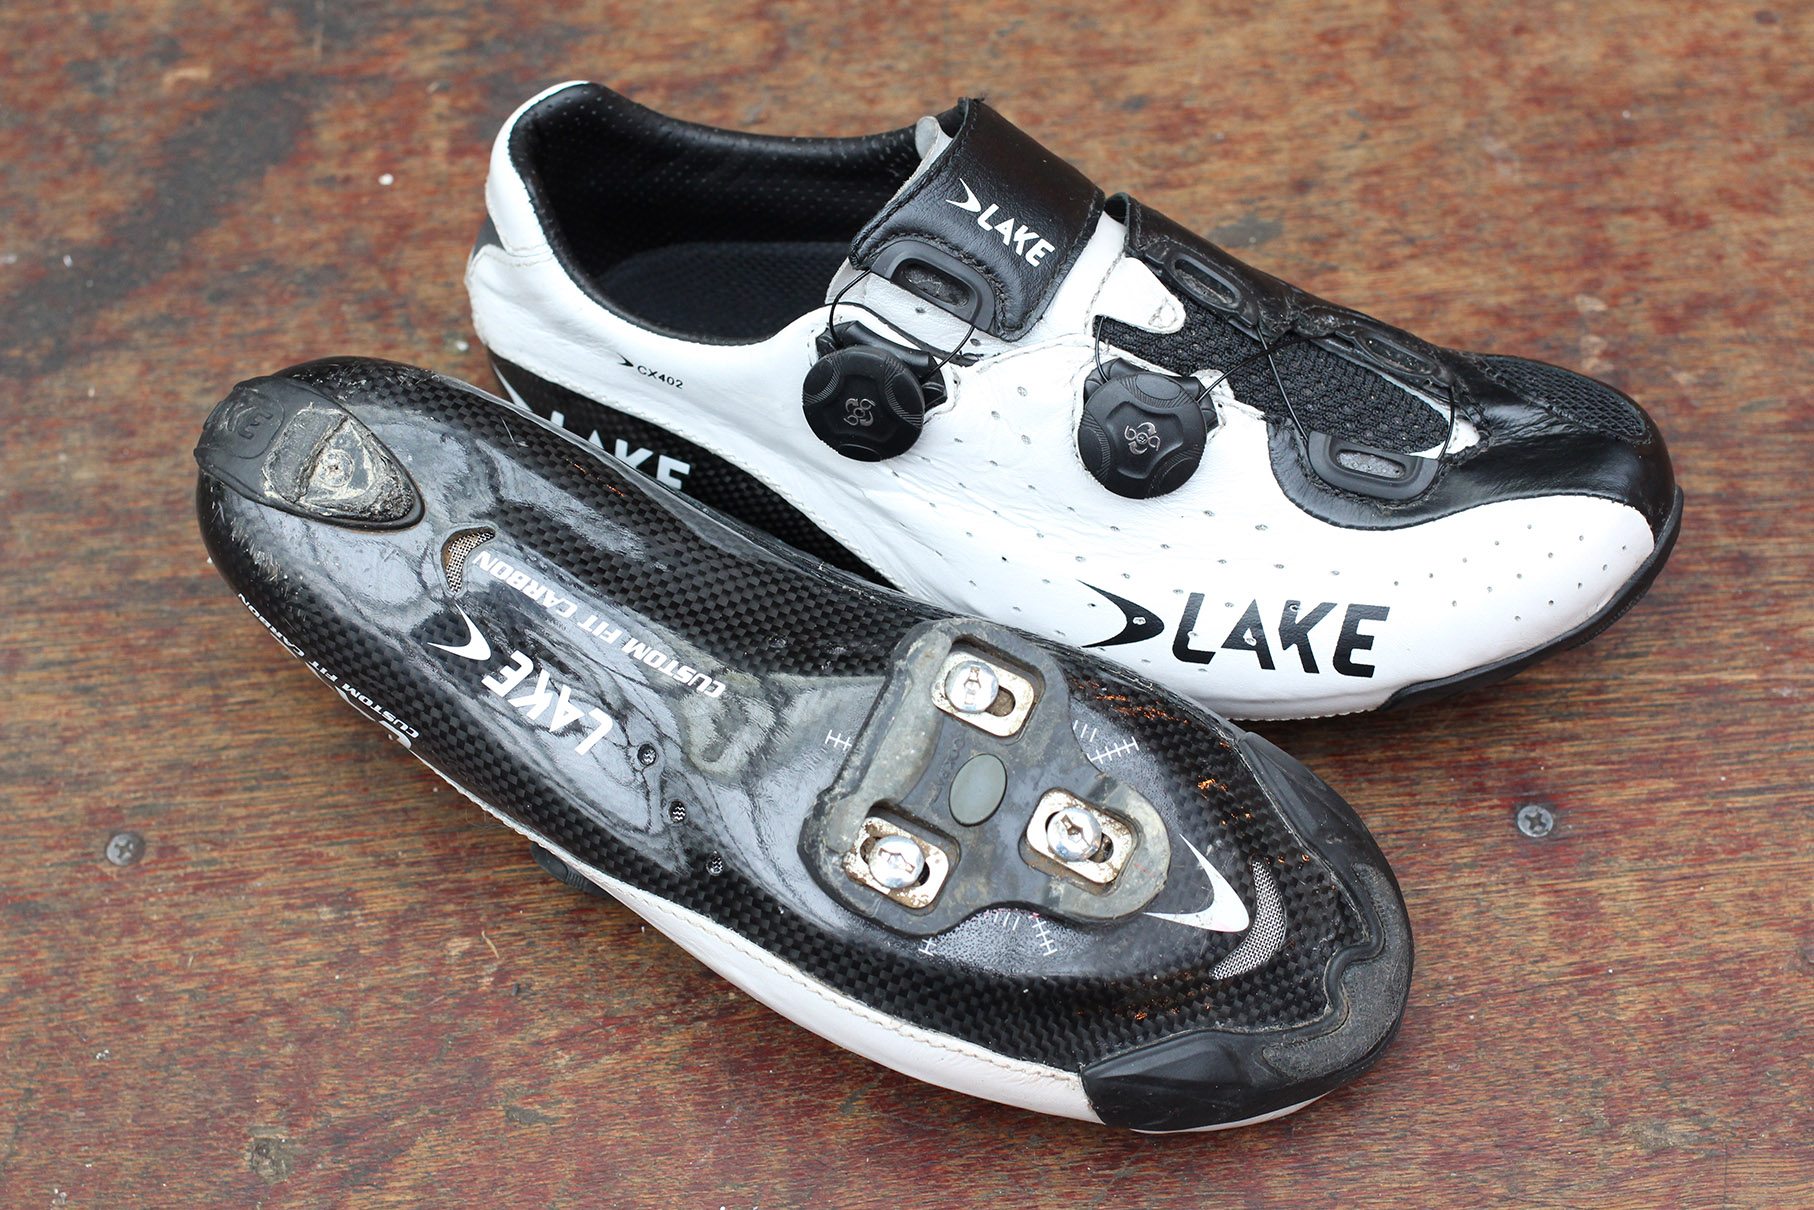 Lake CX 165 Silver Leather Race Cycling Shoes Size 41 